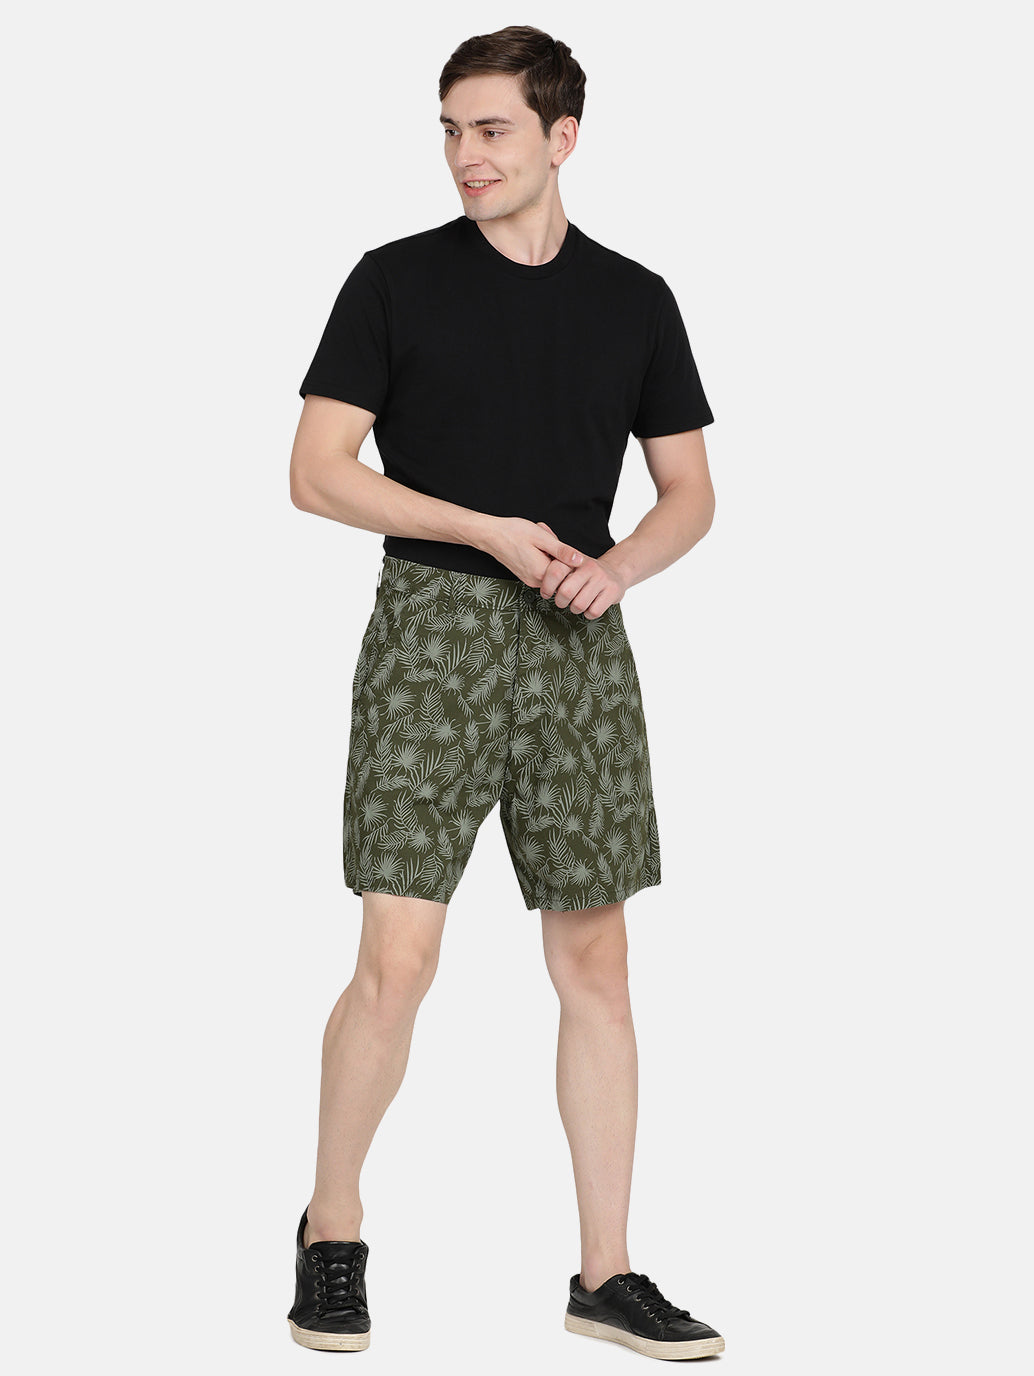 Levi's Men's Relaxed Fit Shorts